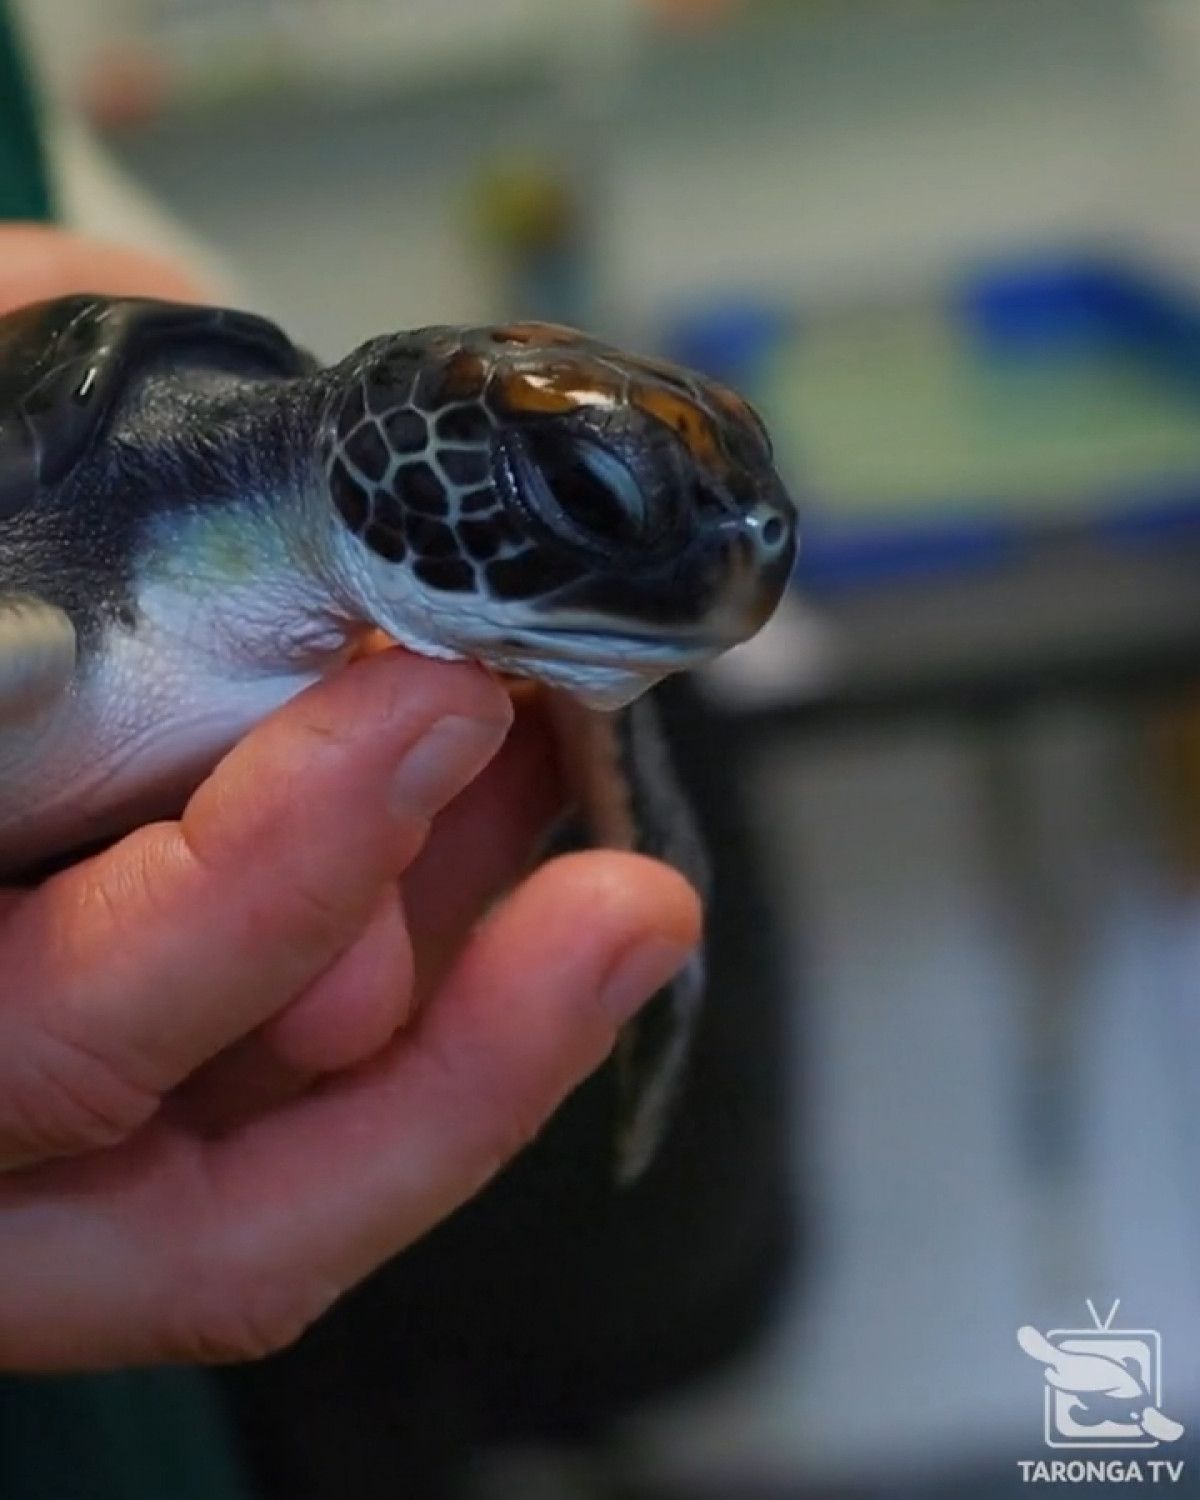 Only plastic was found in the stomach of a turtle rescued in Australia #4